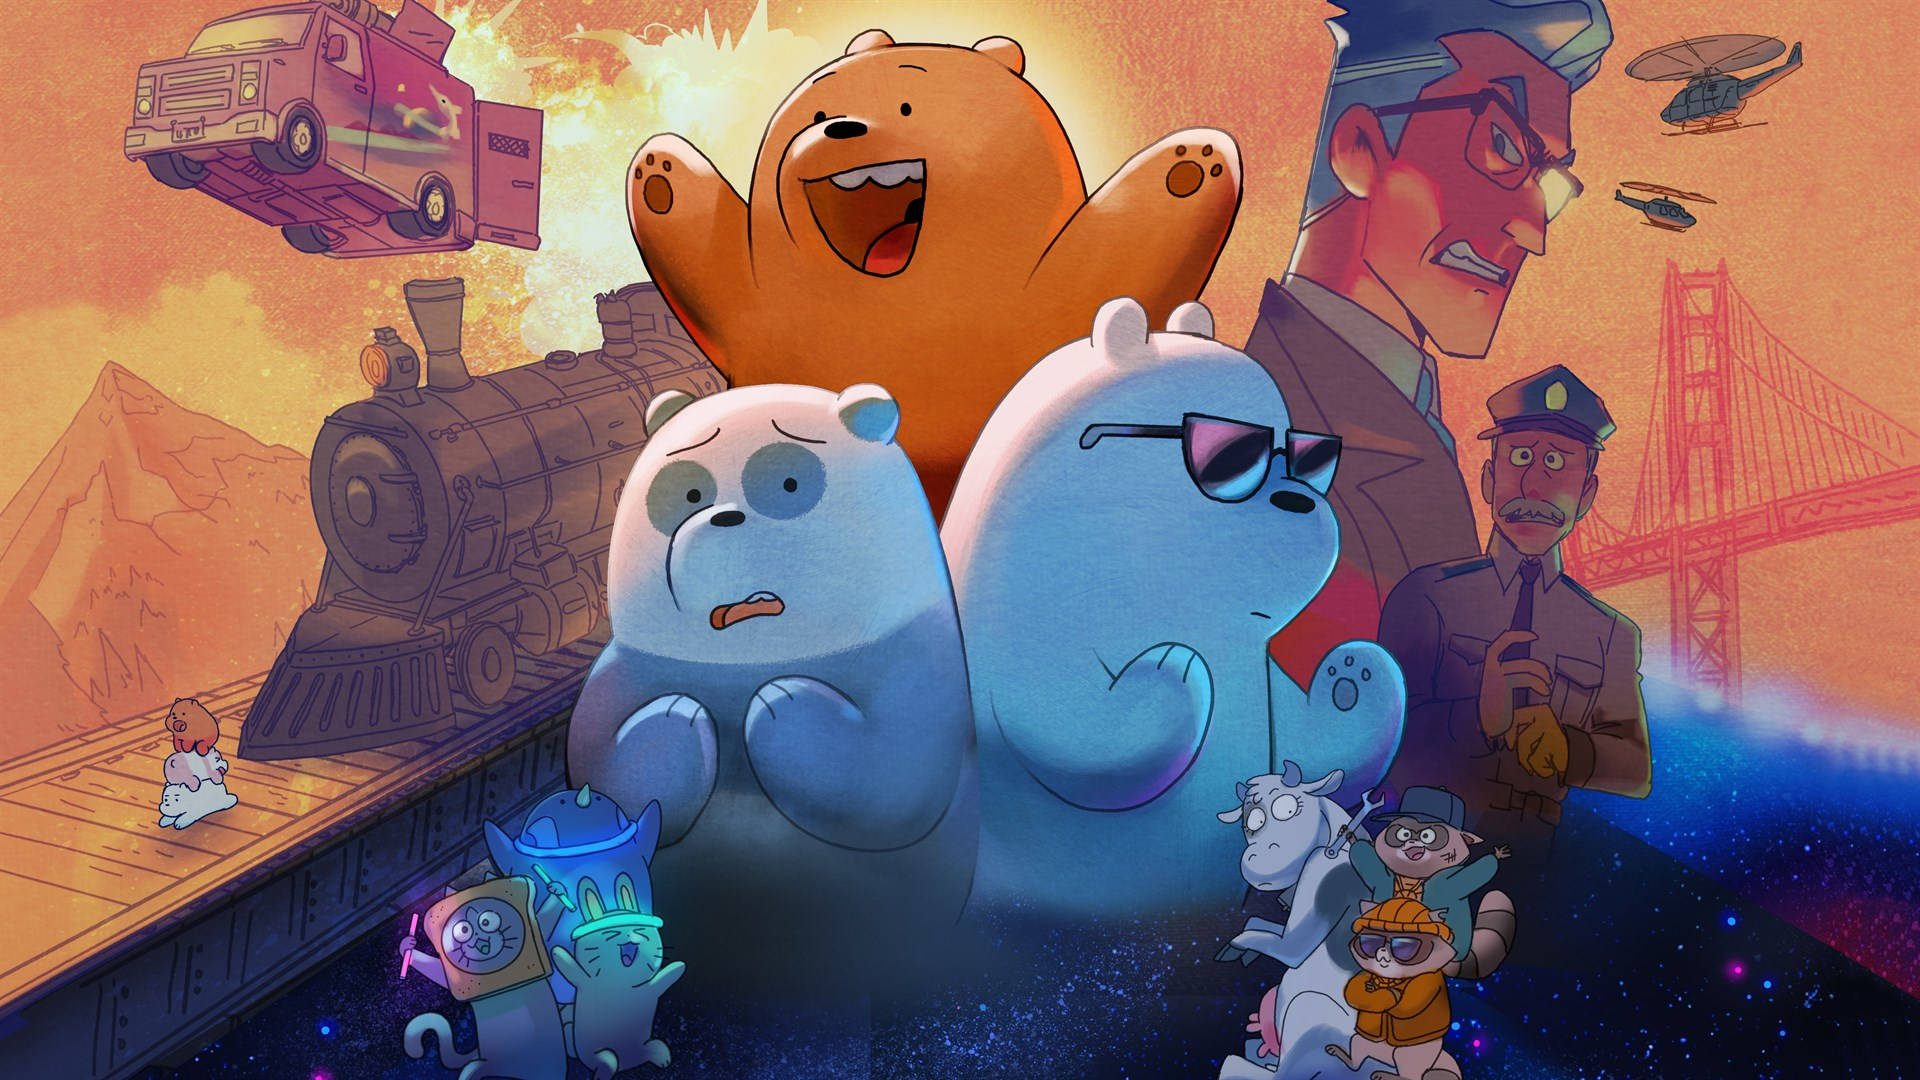 We Bare Bears The Movie Cover Wallpaper